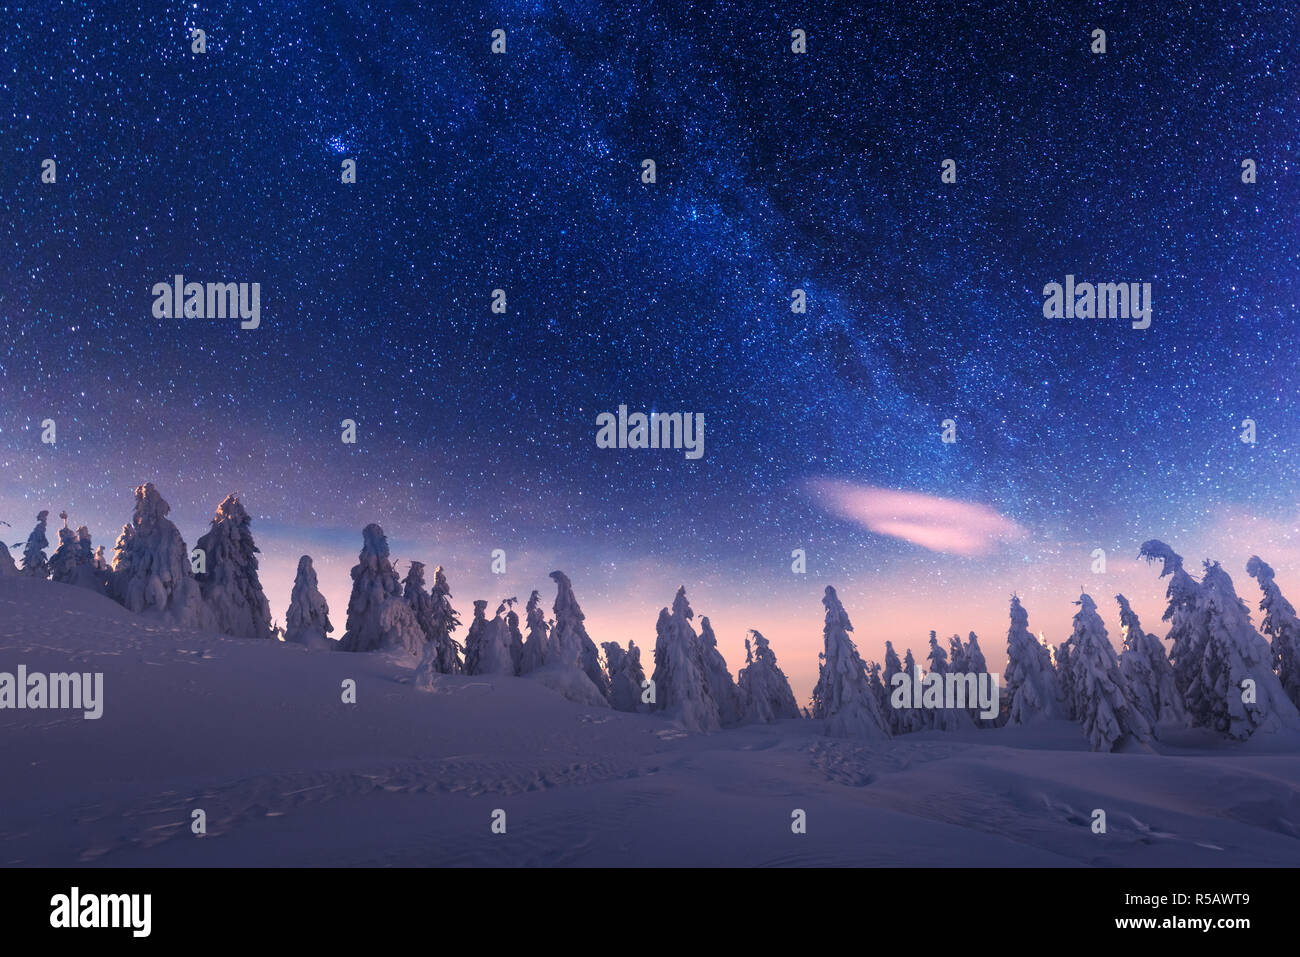 Fantastic winter landscape glowing by star light. Dramatic wintry scene with snowy trees and milky way in night sky. Carpathians, Europe. Stock Photo